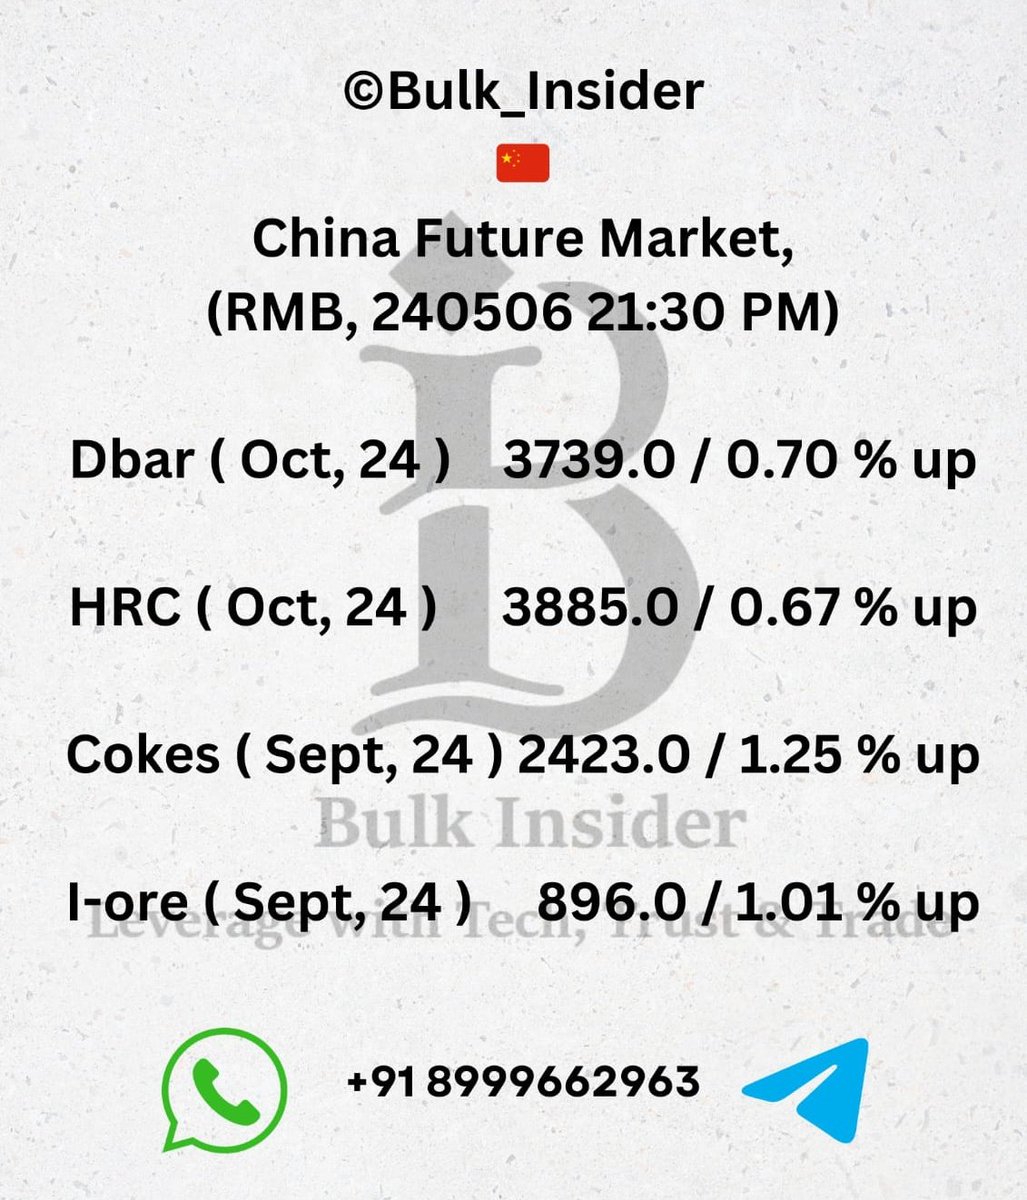 #China #IronOre #Coke #Rebar #HRC #Futures #Afternoon #Daily 
@Bulk_Insider